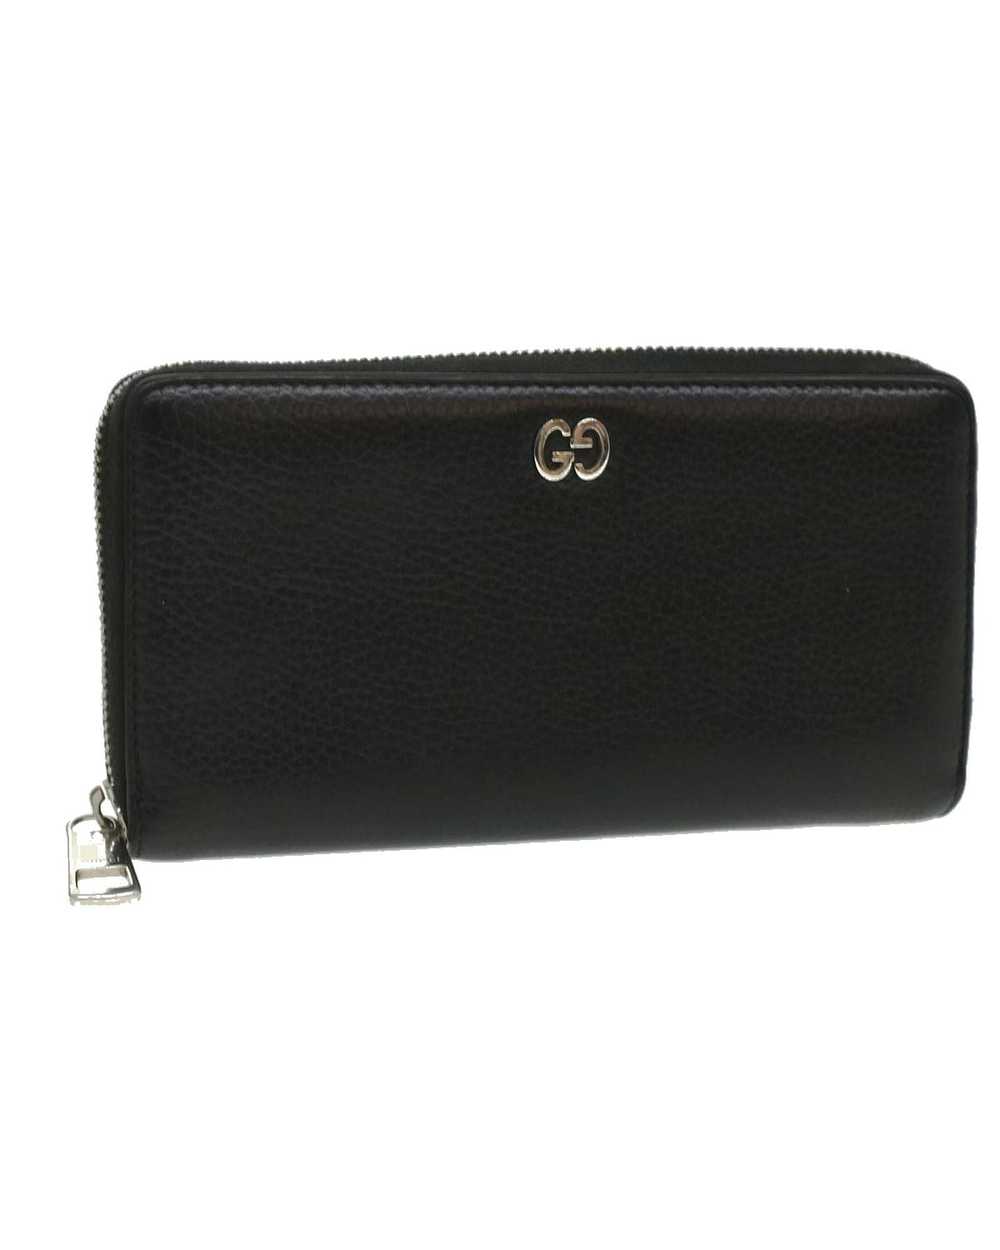 Gucci Black Leather Long Wallet by Gucci 473928 - image 1